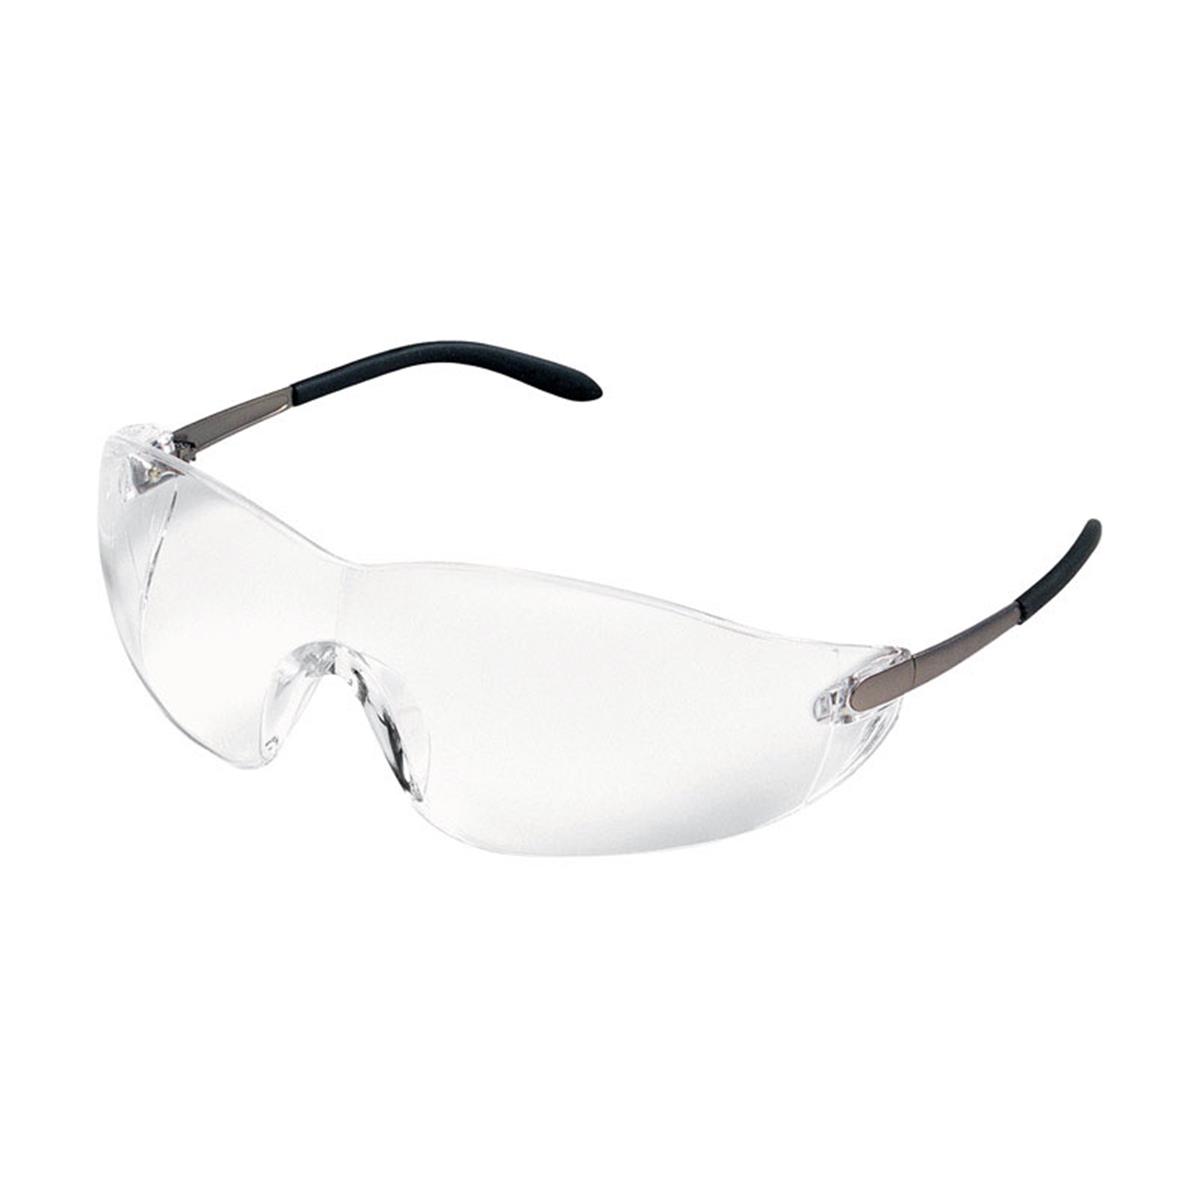 Picture of MCR 2418556 Blackjack Multi-Purpose Safety Glasses with Frame, Clear Lens Frame - Pack of 12